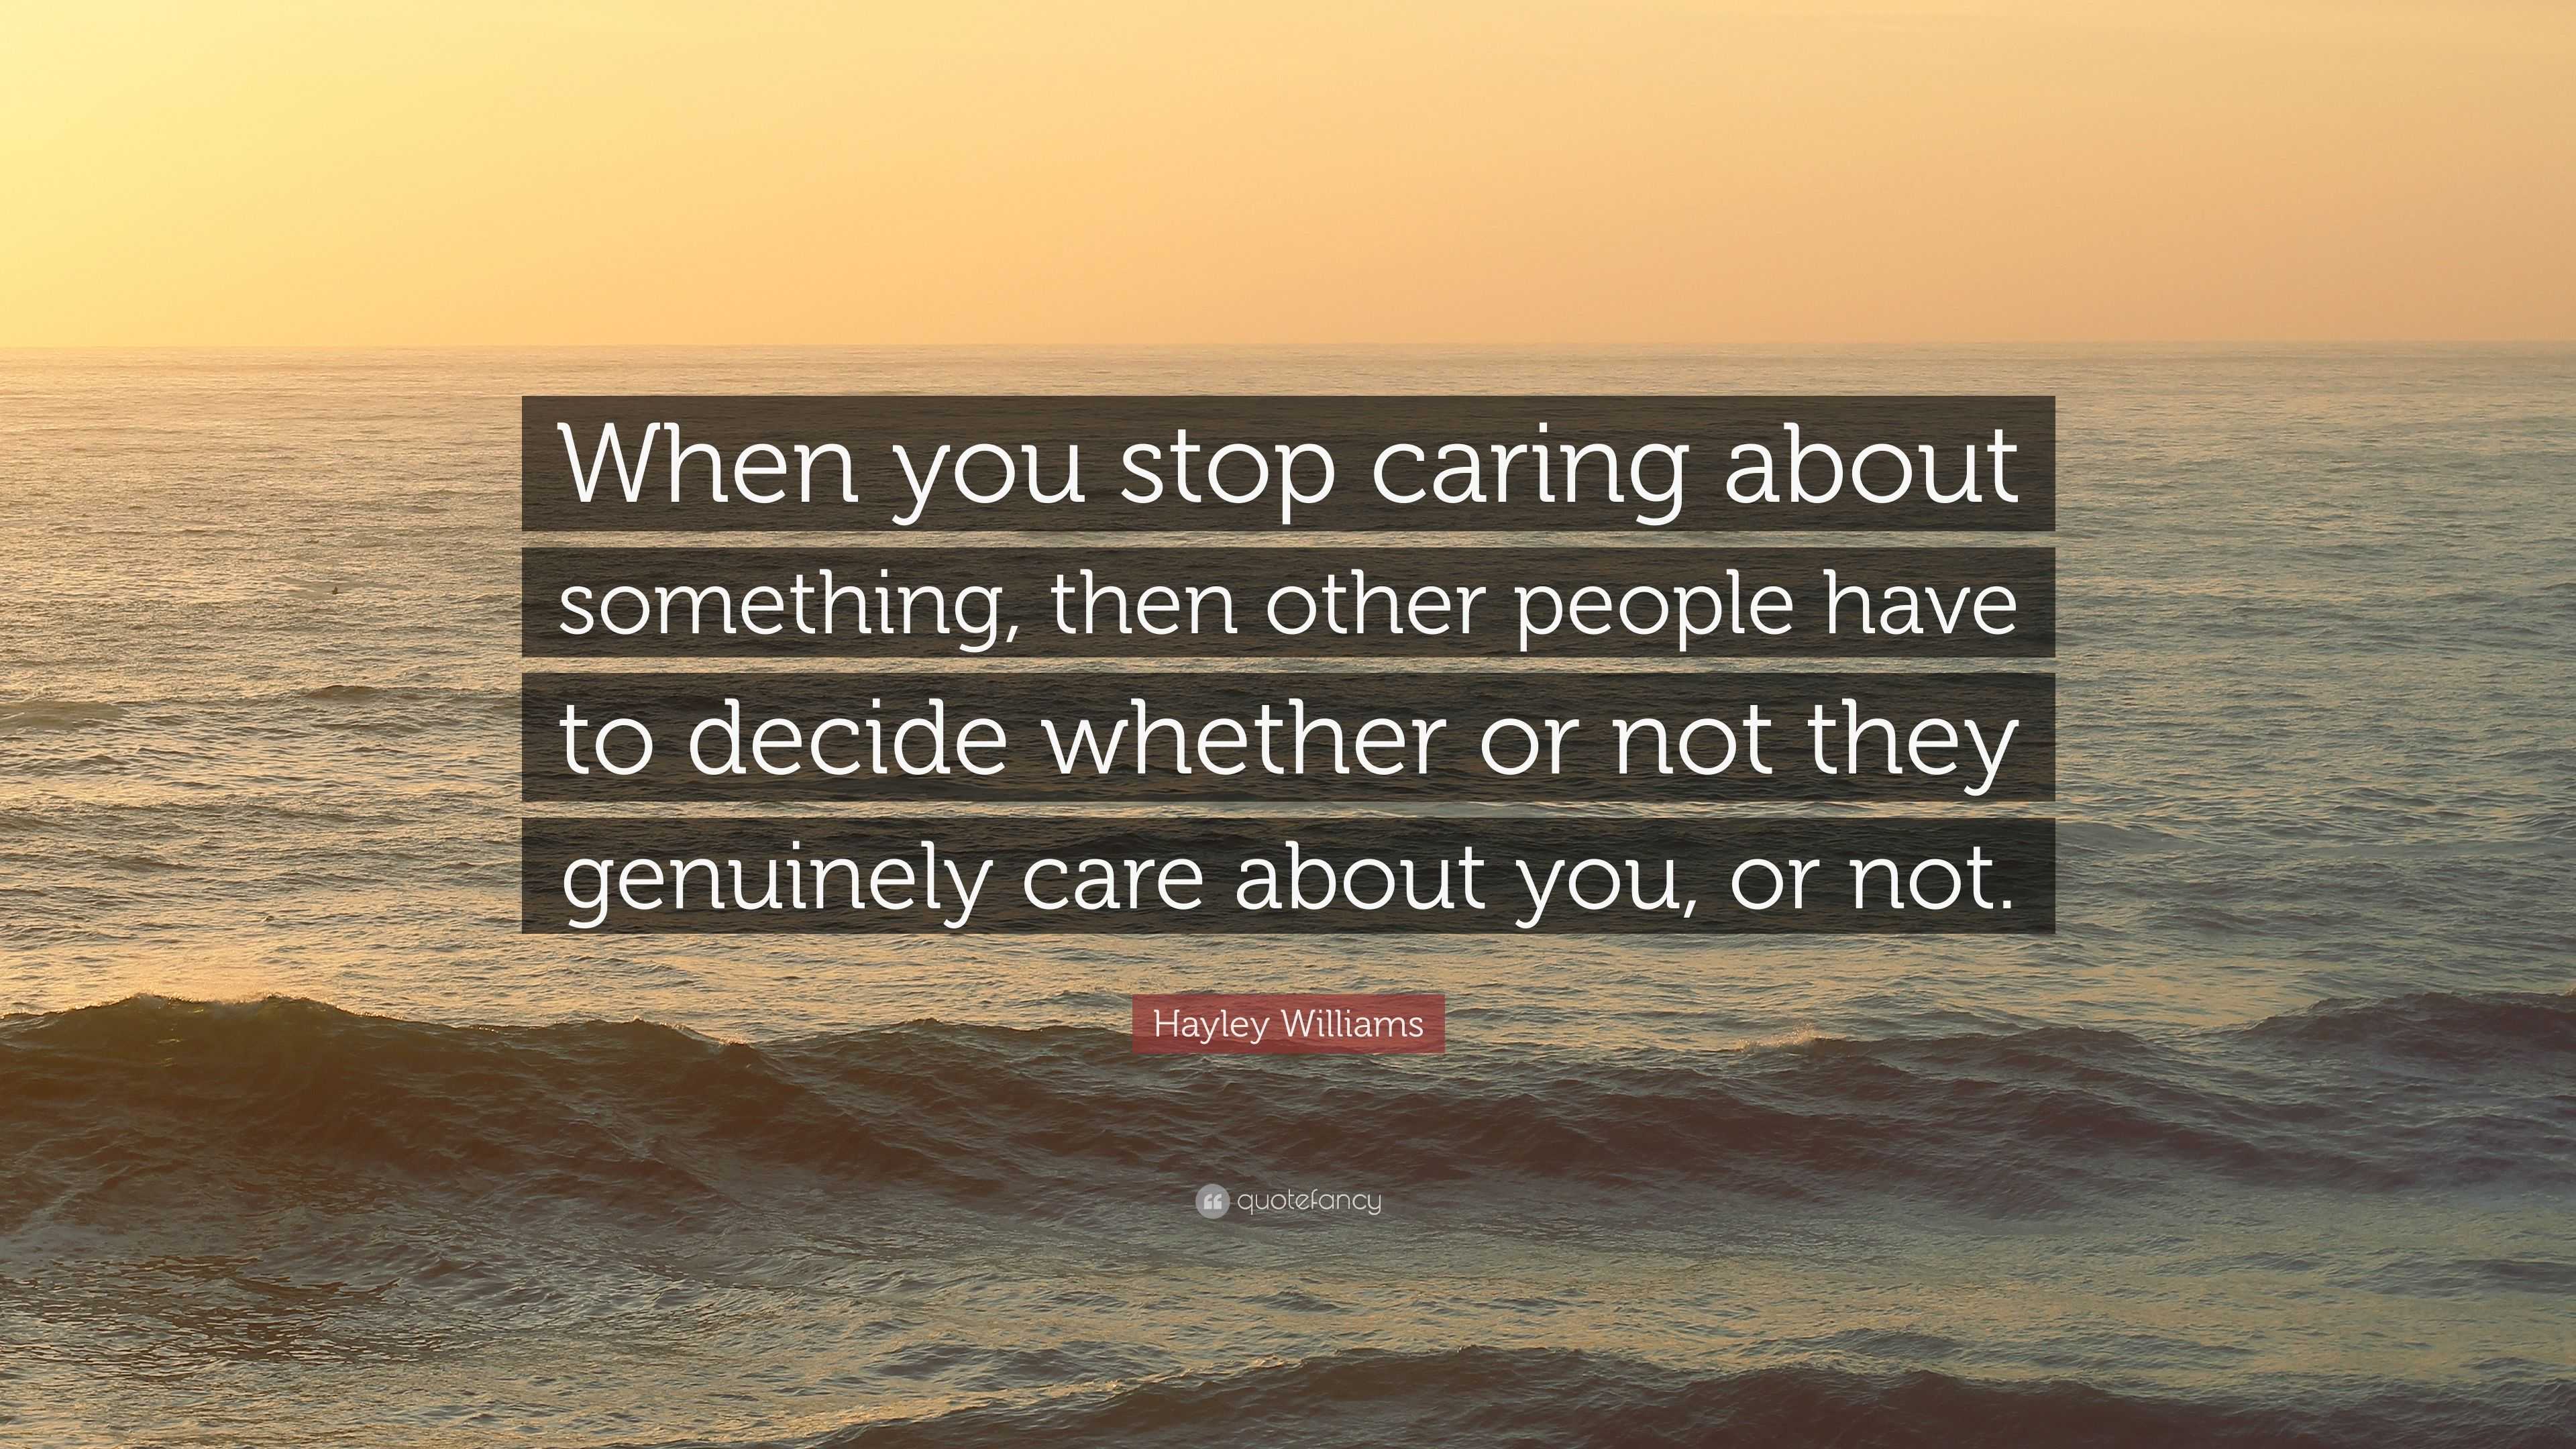 Hayley Williams Quote: “When you stop caring about something, then ...